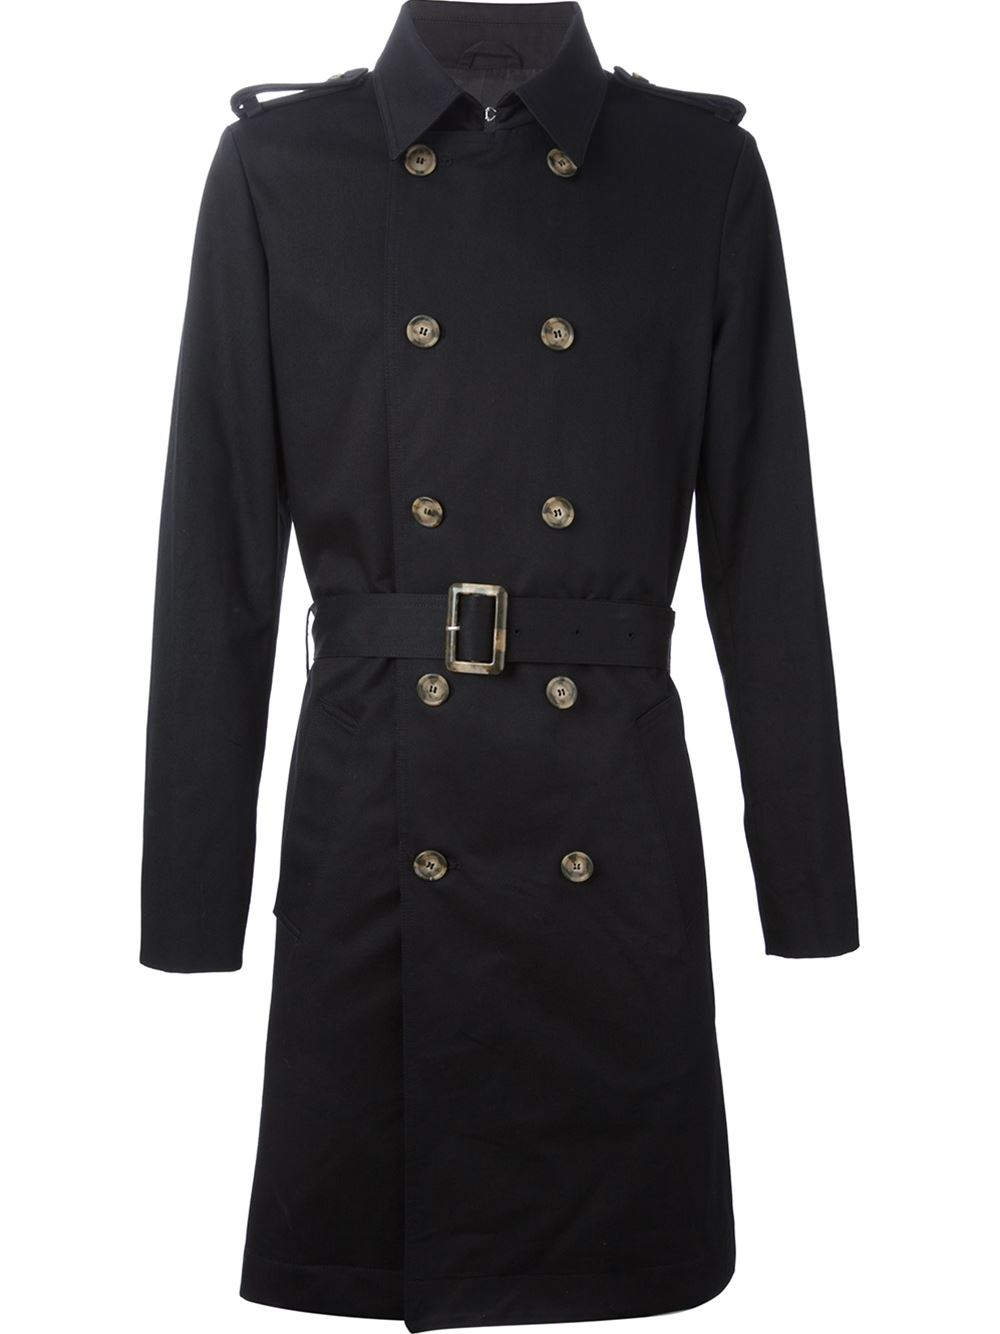 AMI Classic Trench Coat in Black for Men - Lyst